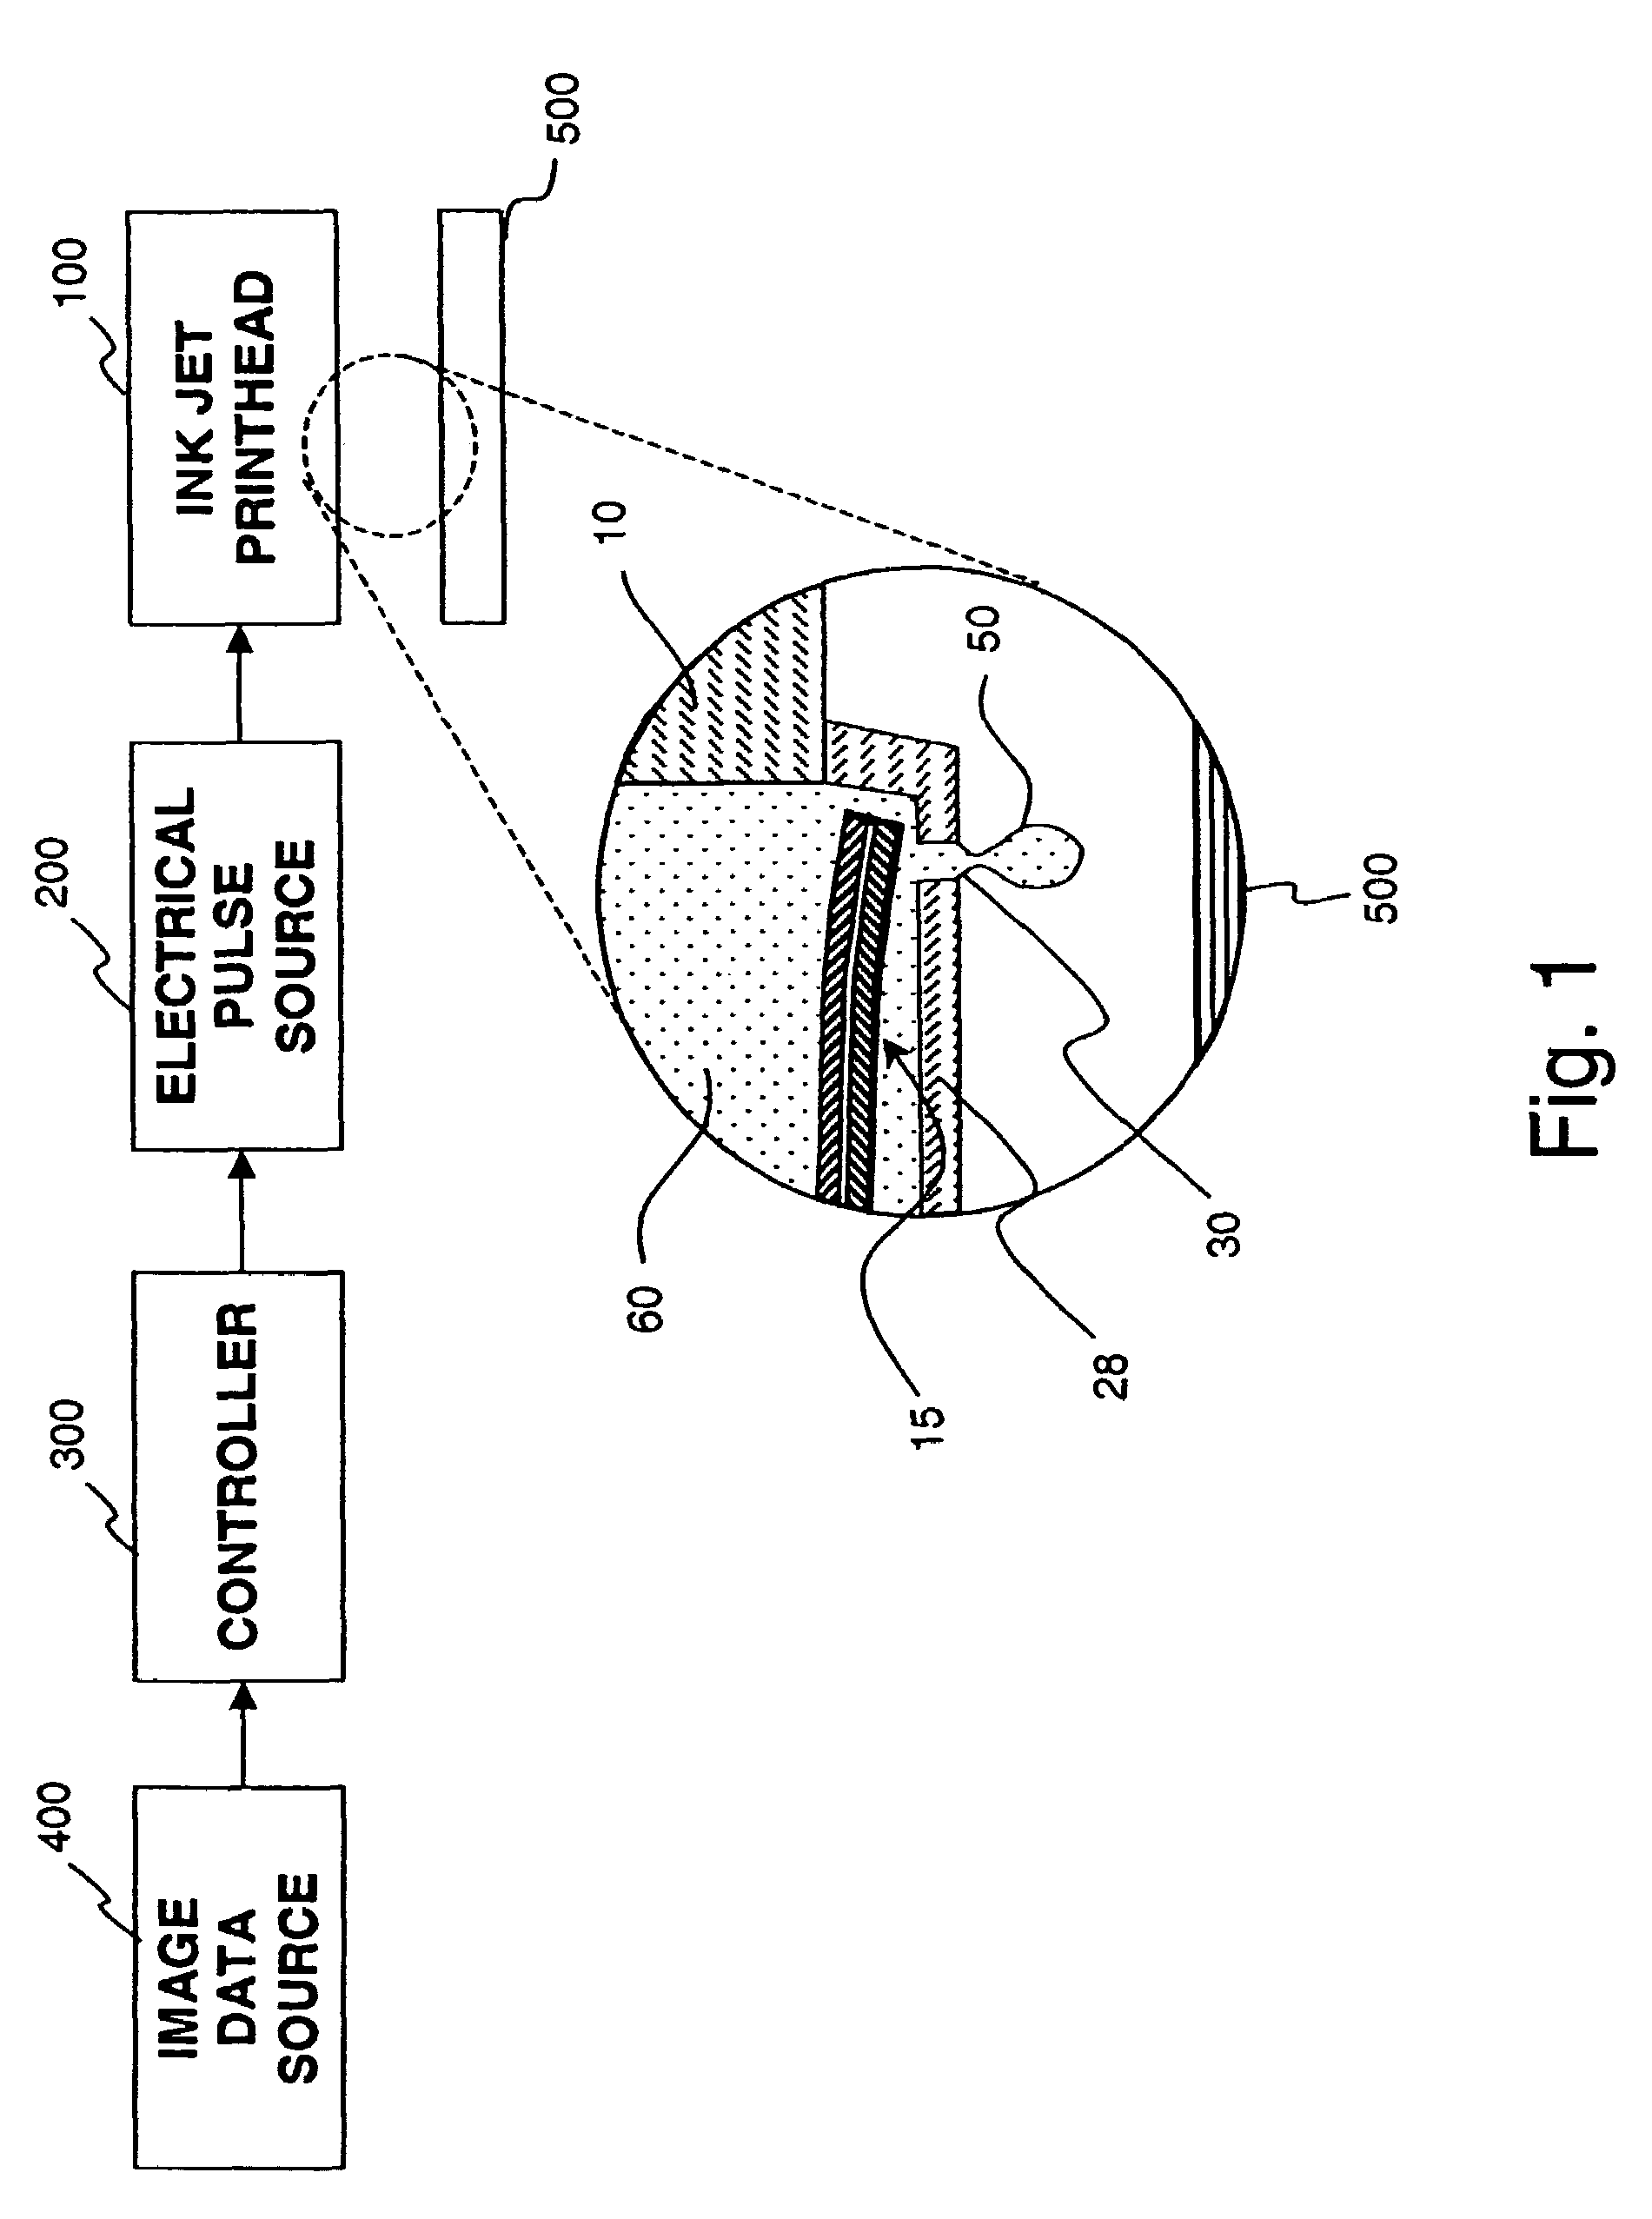 Tapered multi-layer thermal actuator and method of operating same